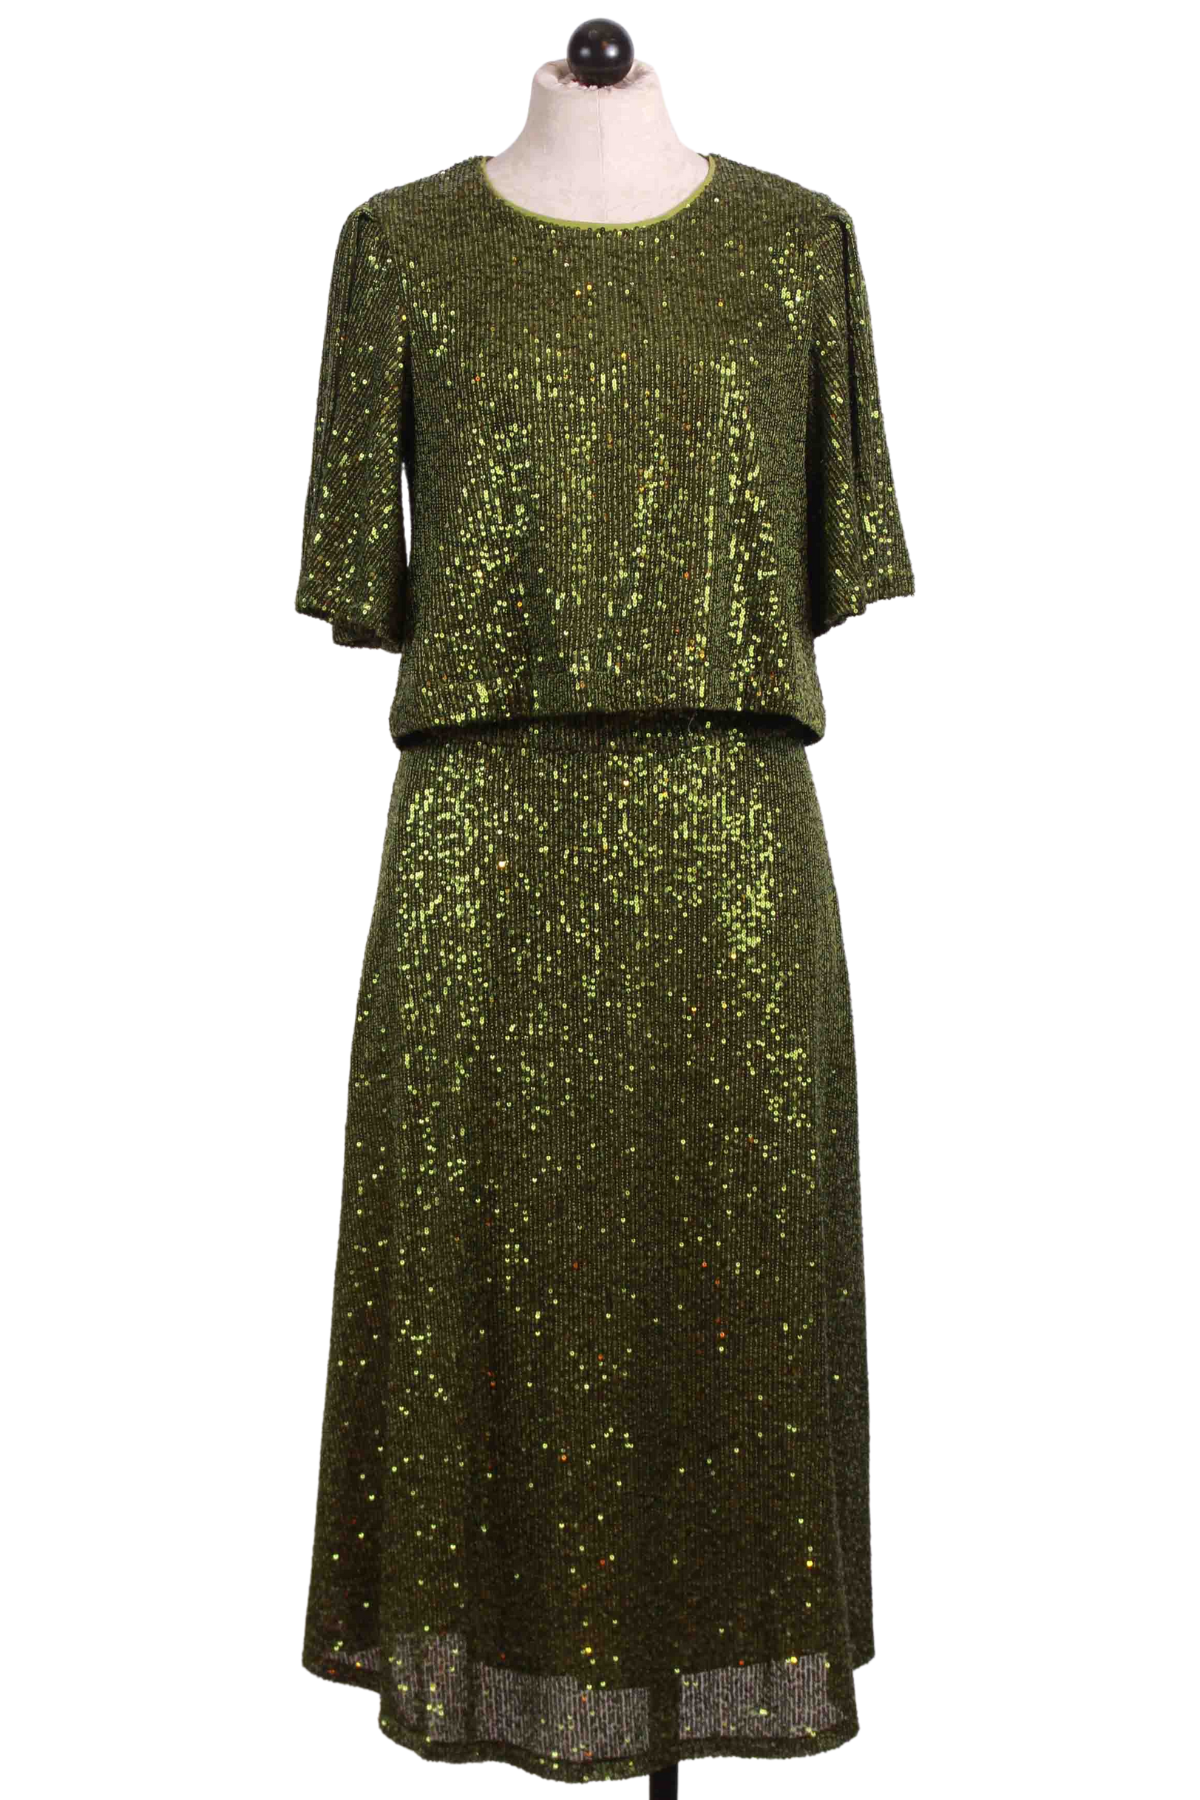 Green Sparkle Sequined Cropped Flutter Sleeve Top by Traffic People with matching skirt